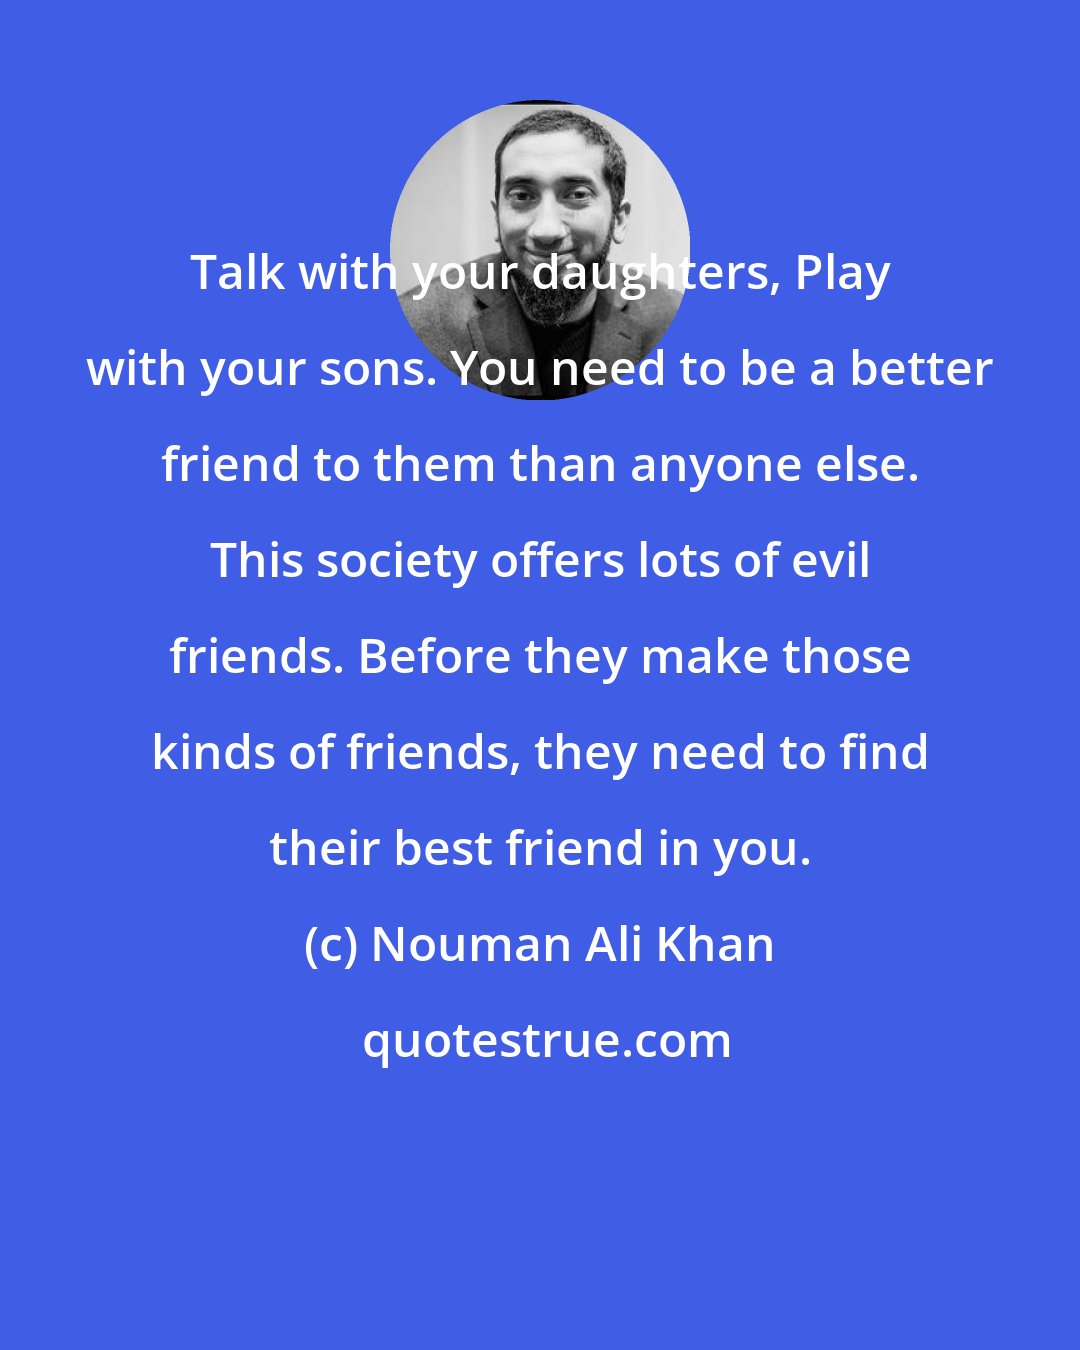 Nouman Ali Khan: Talk with your daughters, Play with your sons. You need to be a better friend to them than anyone else. This society offers lots of evil friends. Before they make those kinds of friends, they need to find their best friend in you.